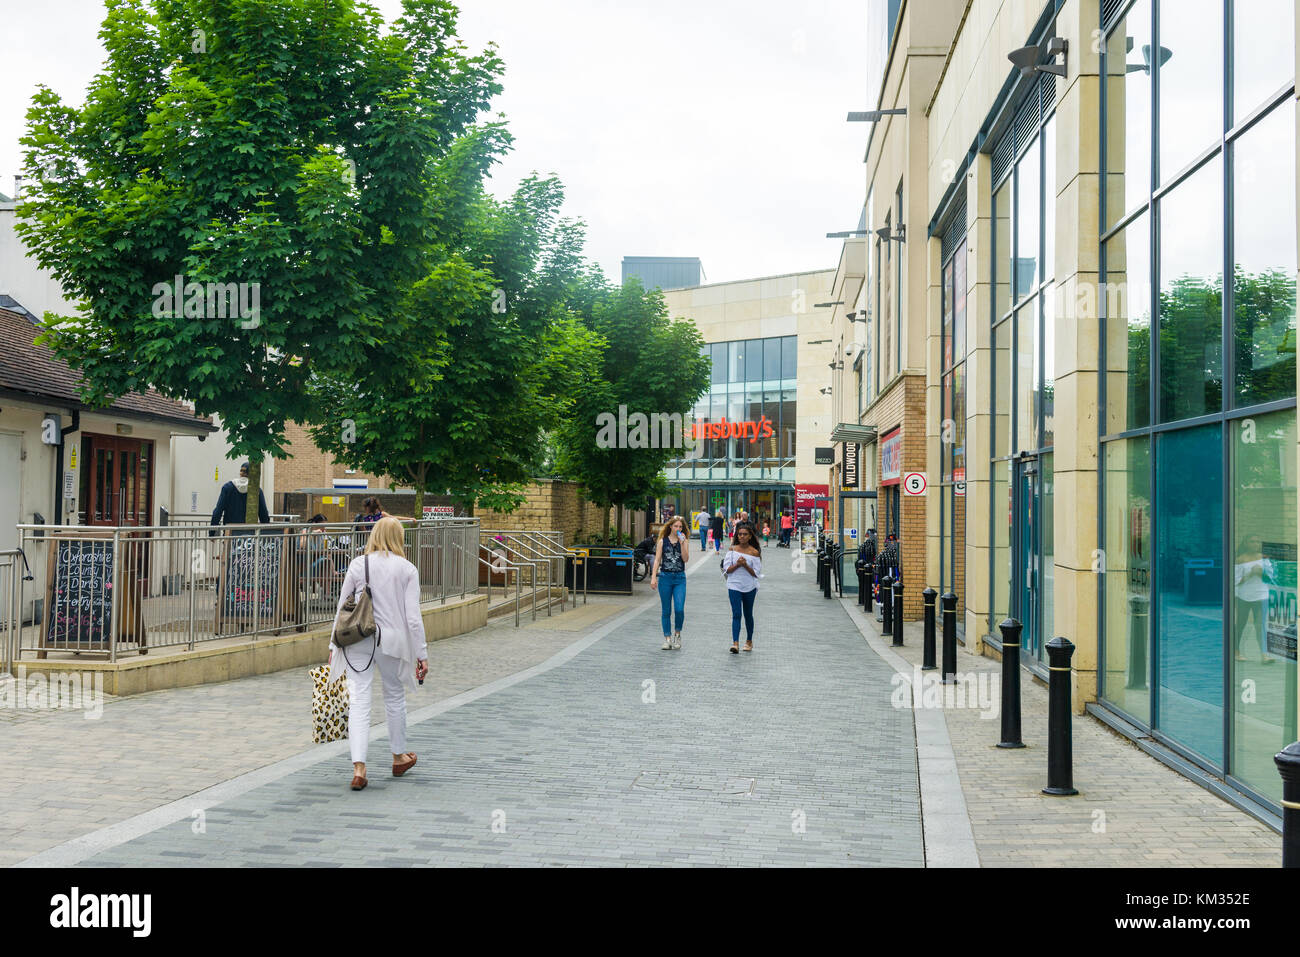 Shoppers walking around Pioneer Square urban regeneration with Sainsburys supermarket in background, Bicester town, England, United Kingdom Stock Photo